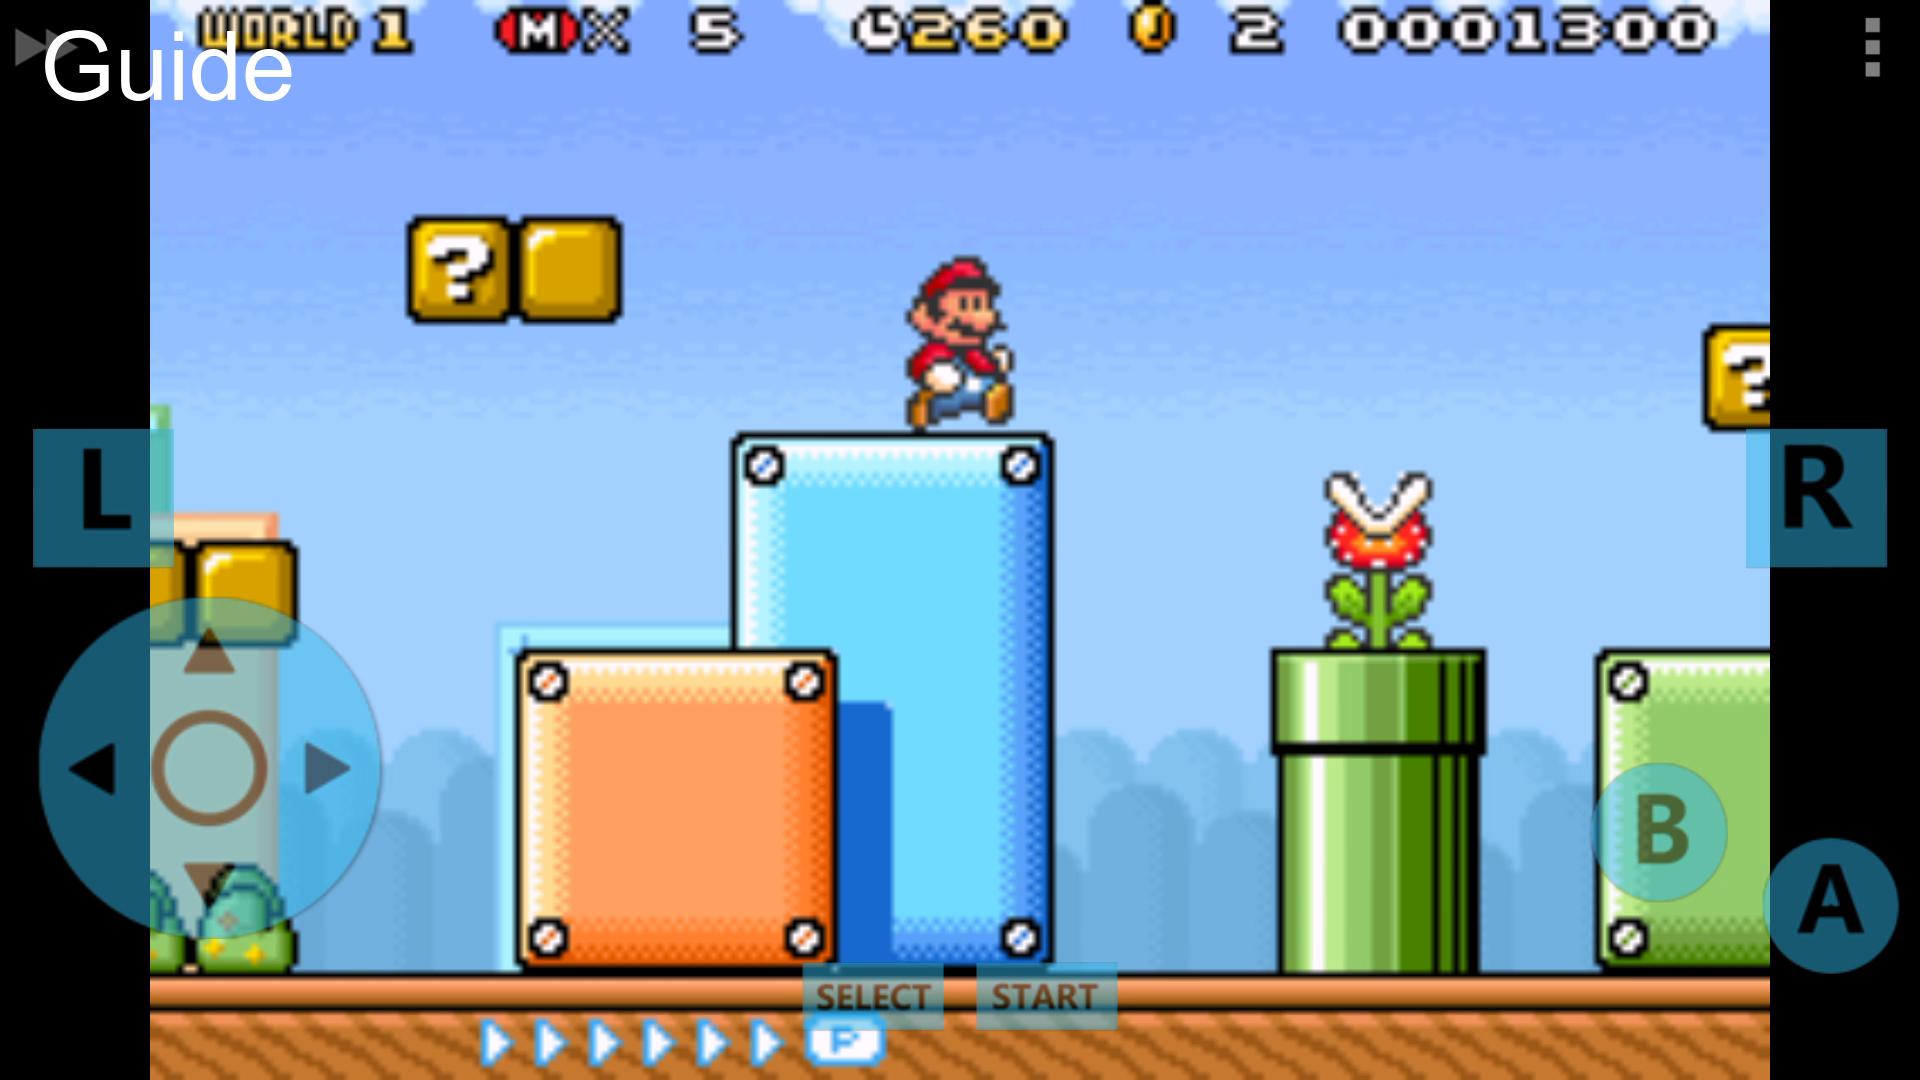 Guide for Super Mario Advance 4 (GBA) for Android - APK Download